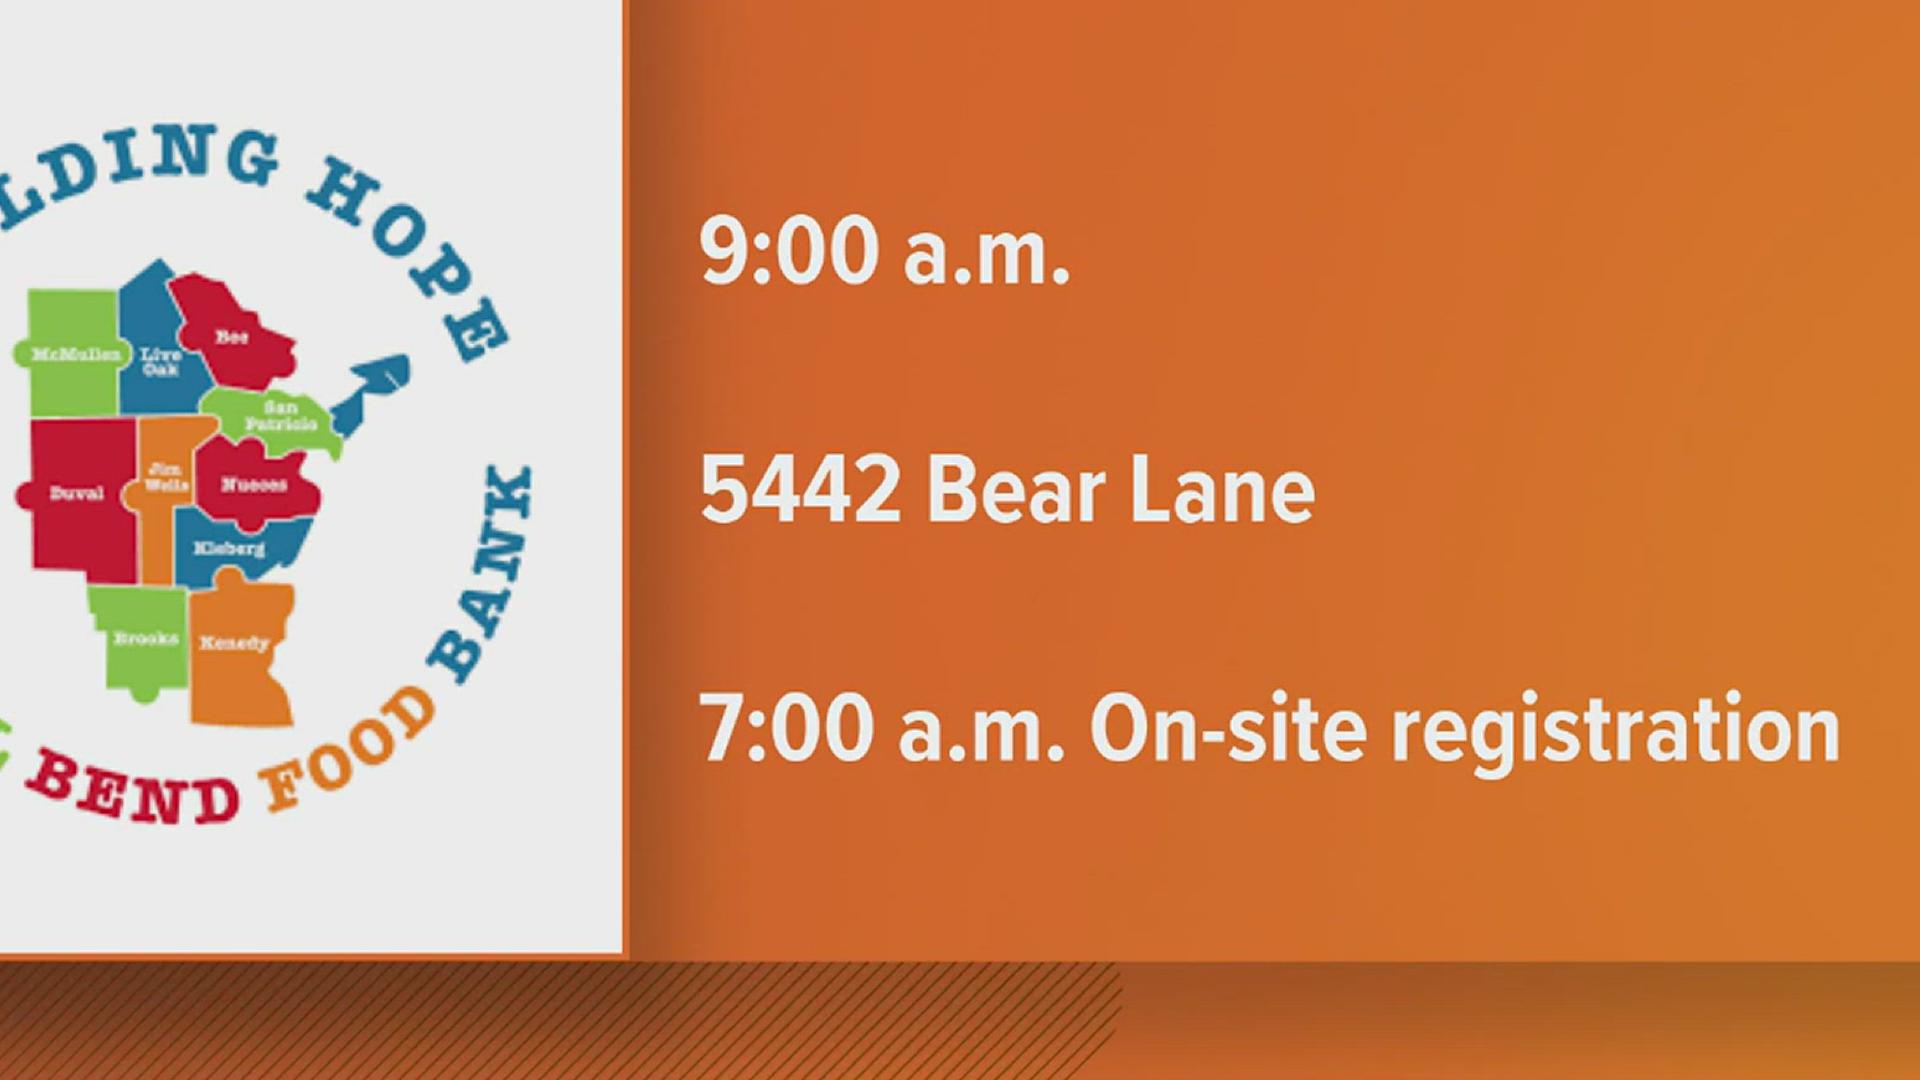 If you're new to the process --you can register on-site at 7 a.m. at Bear Lane off NPID.